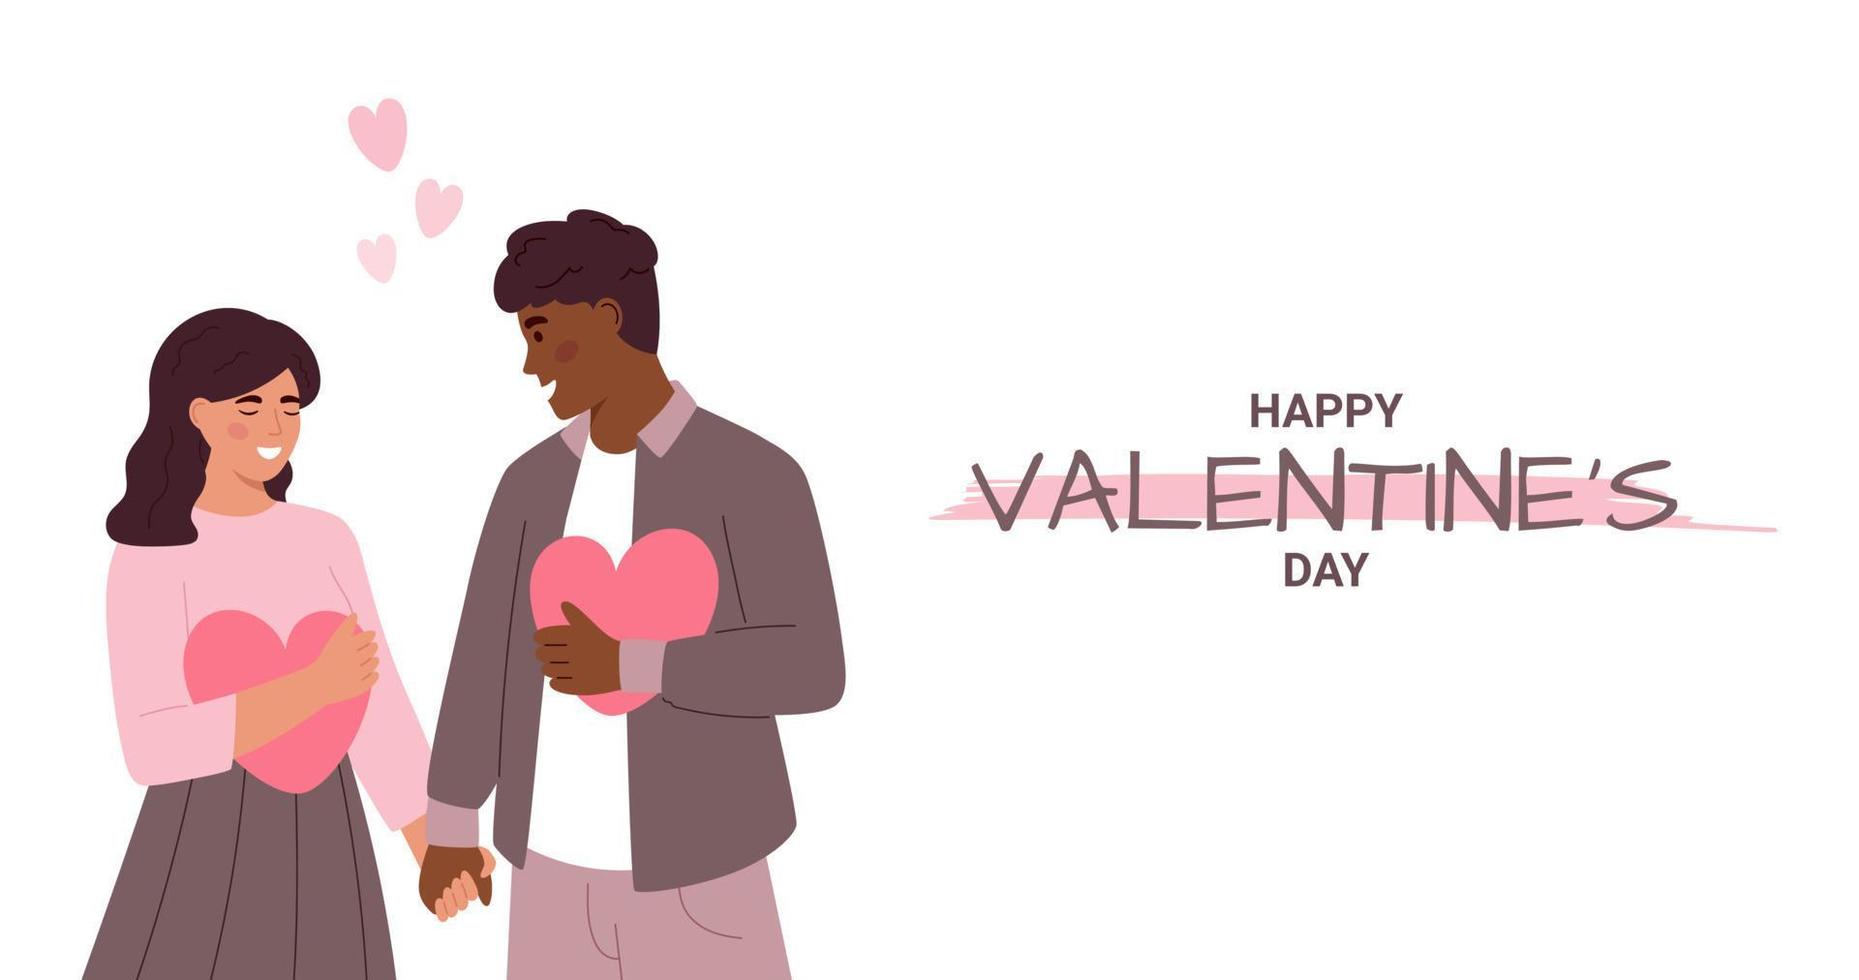 Cute diversity couple holding hands. Happy Valentine's Day. Couple in love. Man and woman embracing hearts. Couple's day. Banner. Isolated on white background. vector